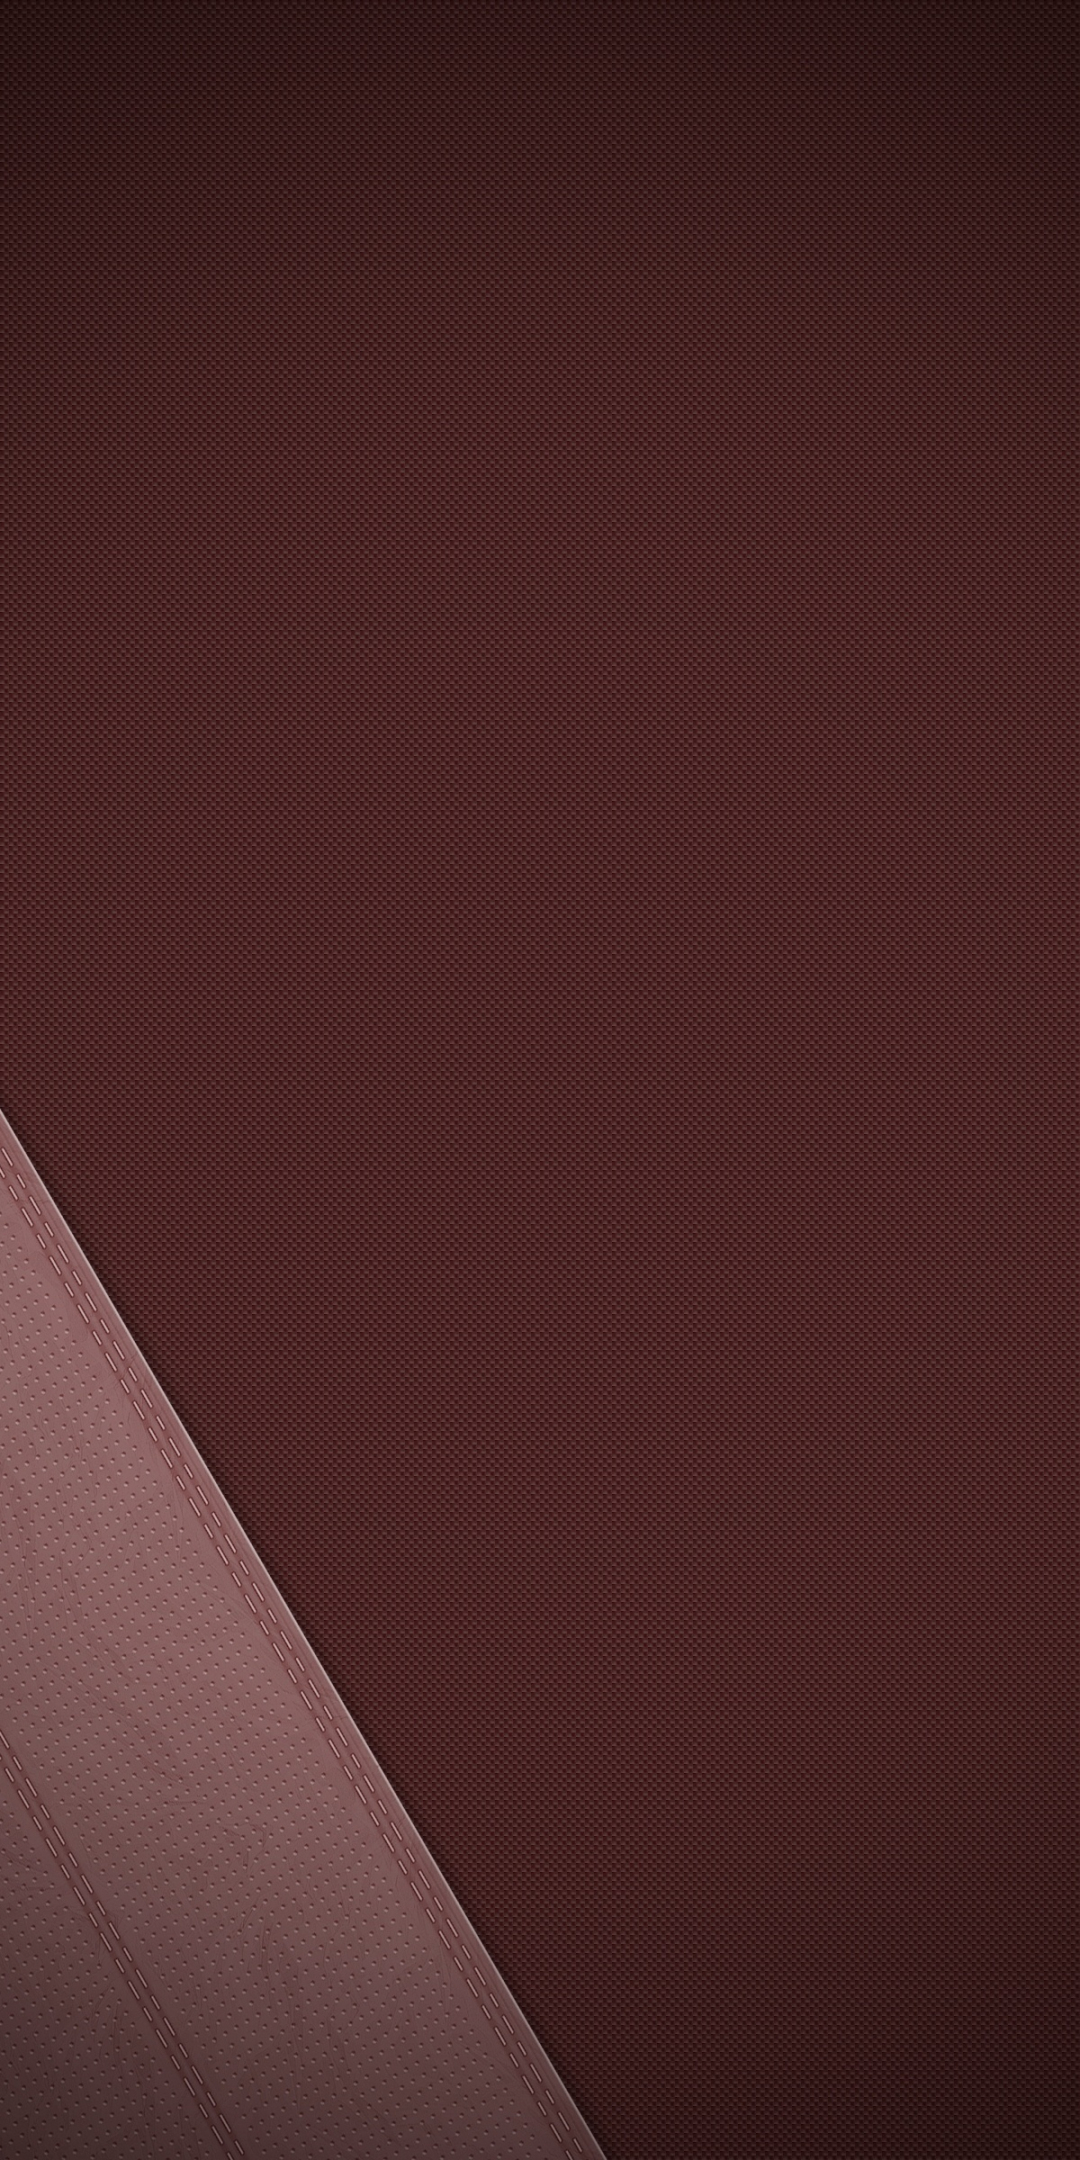 Brown leather, dots, texture, 1080x2160 wallpaper